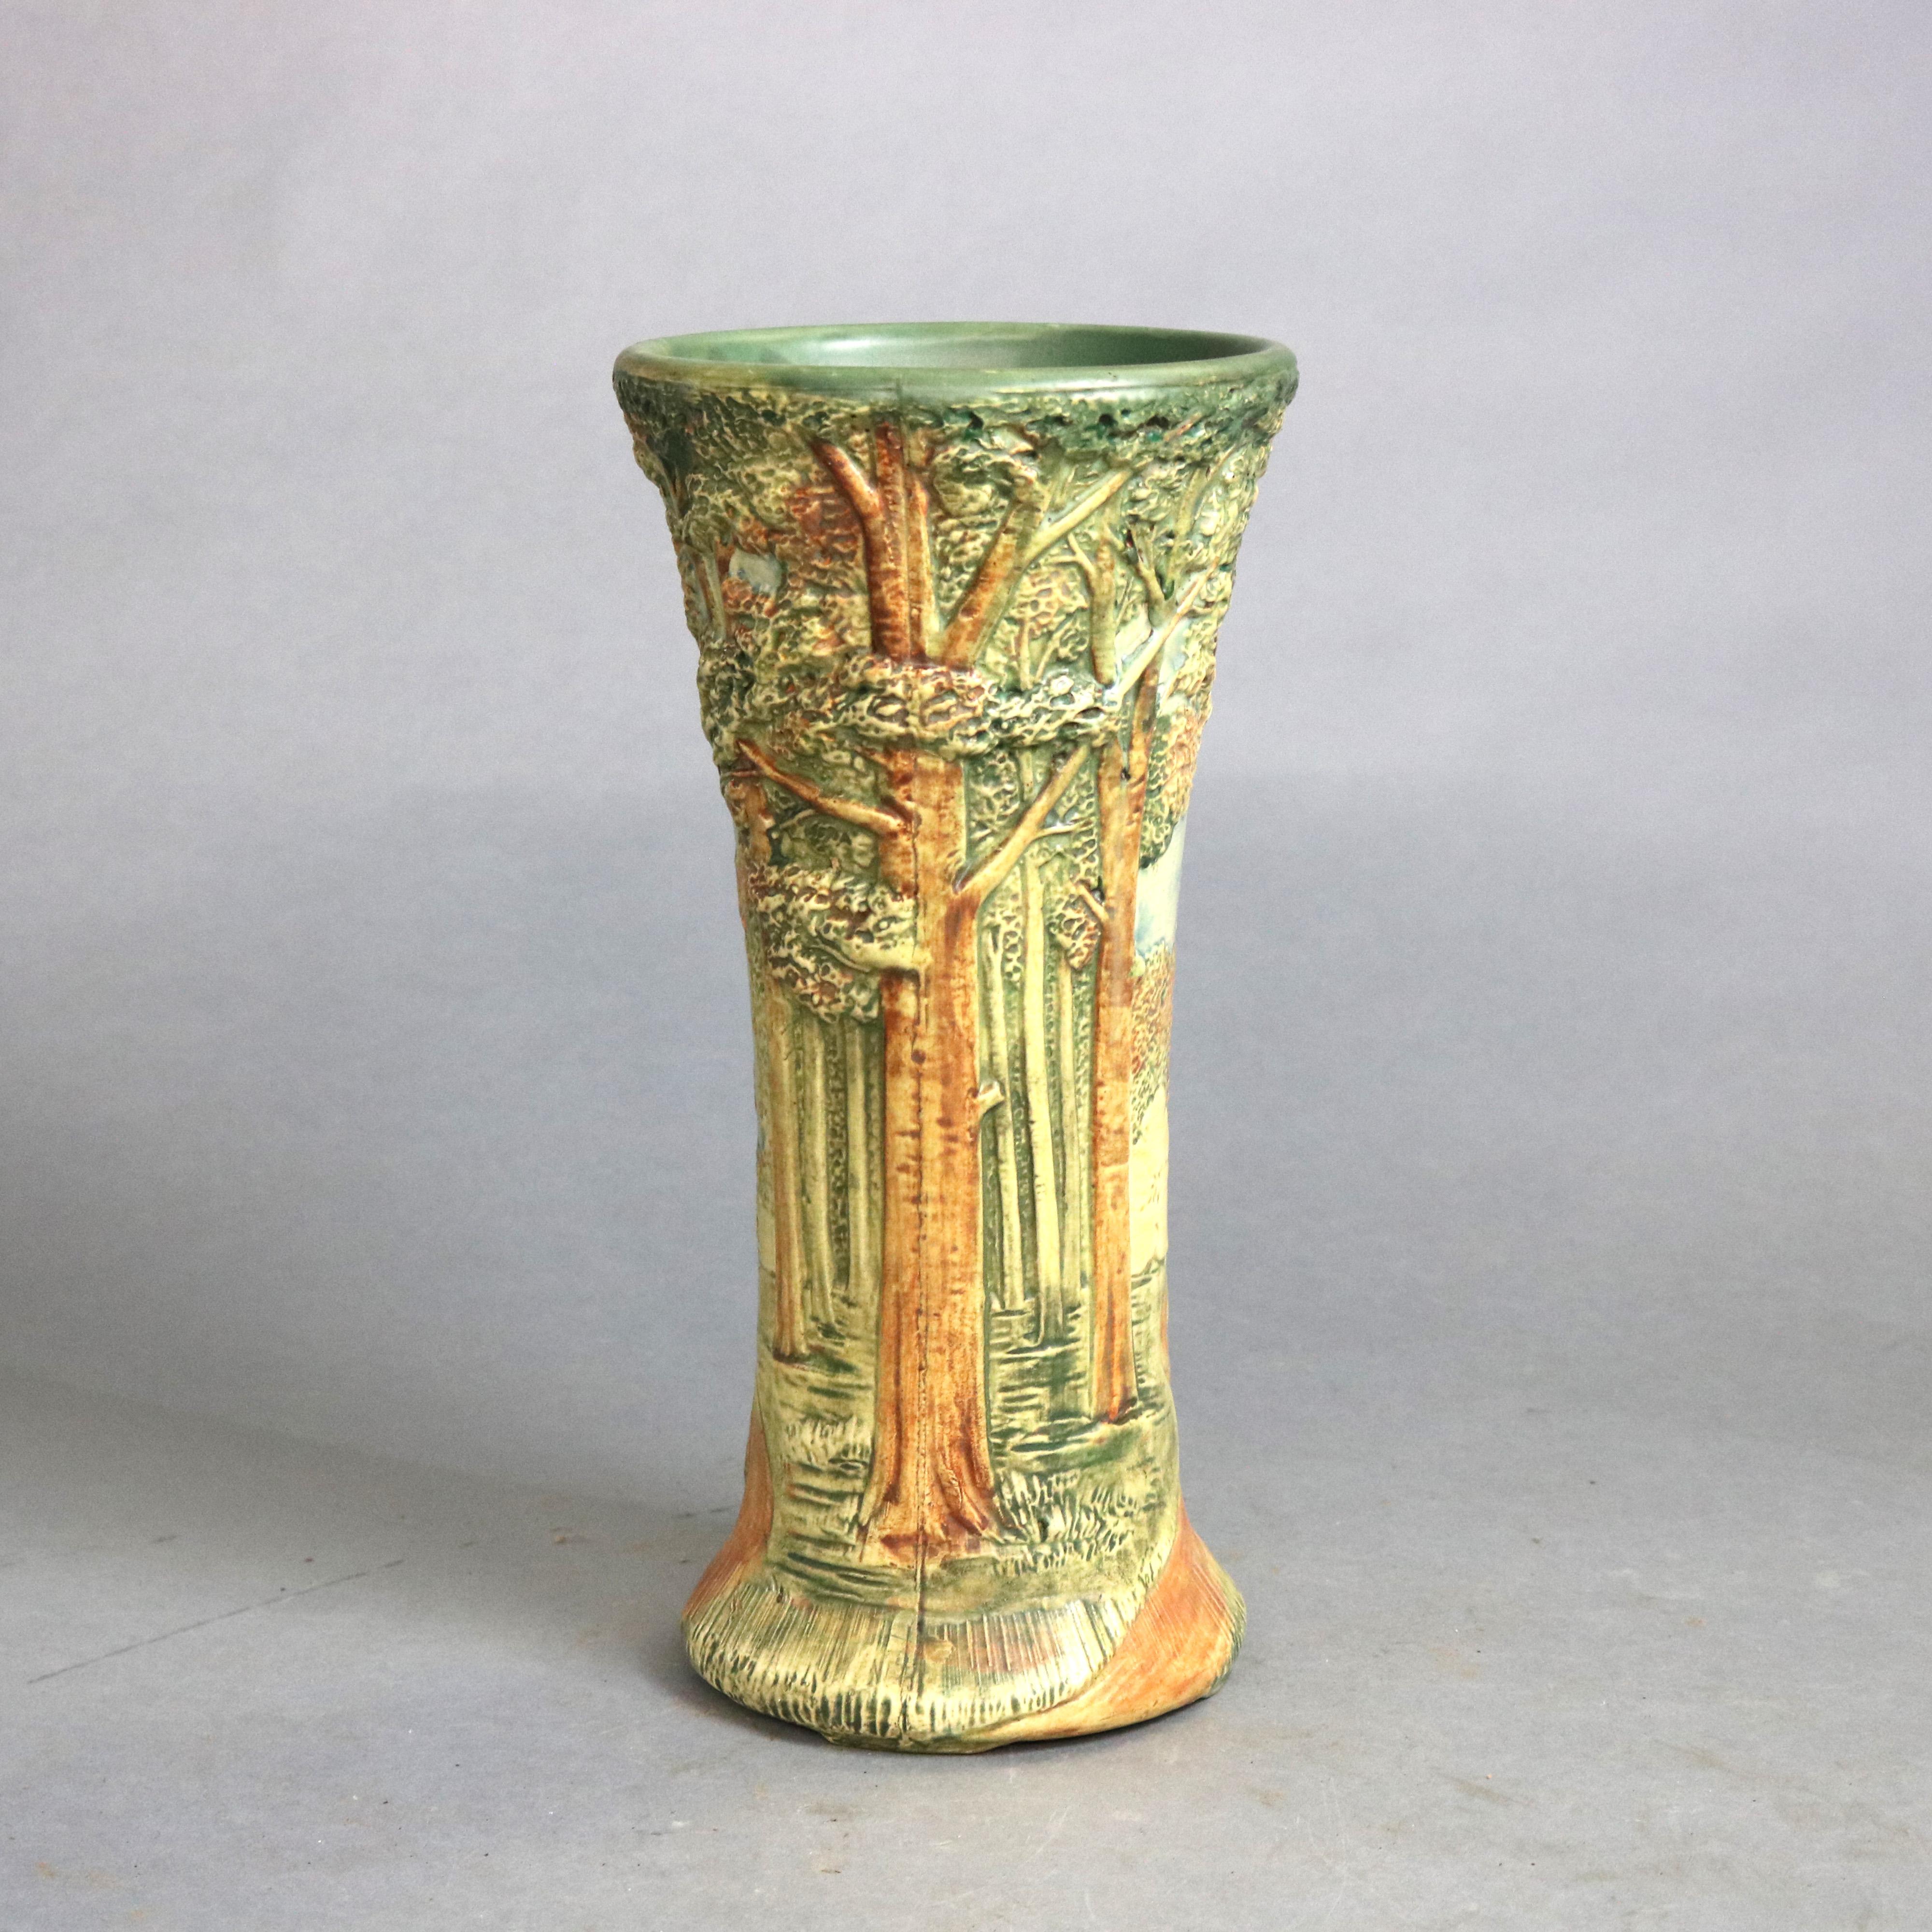 An antique vase by Weller in the Forest pattern offers art pottery construction in hourglass form with polychrome all-around landscape scene in relief, unsigned, circa 1930

Measures - 13.5'' H x 6.5'' W x 6.5'' D.